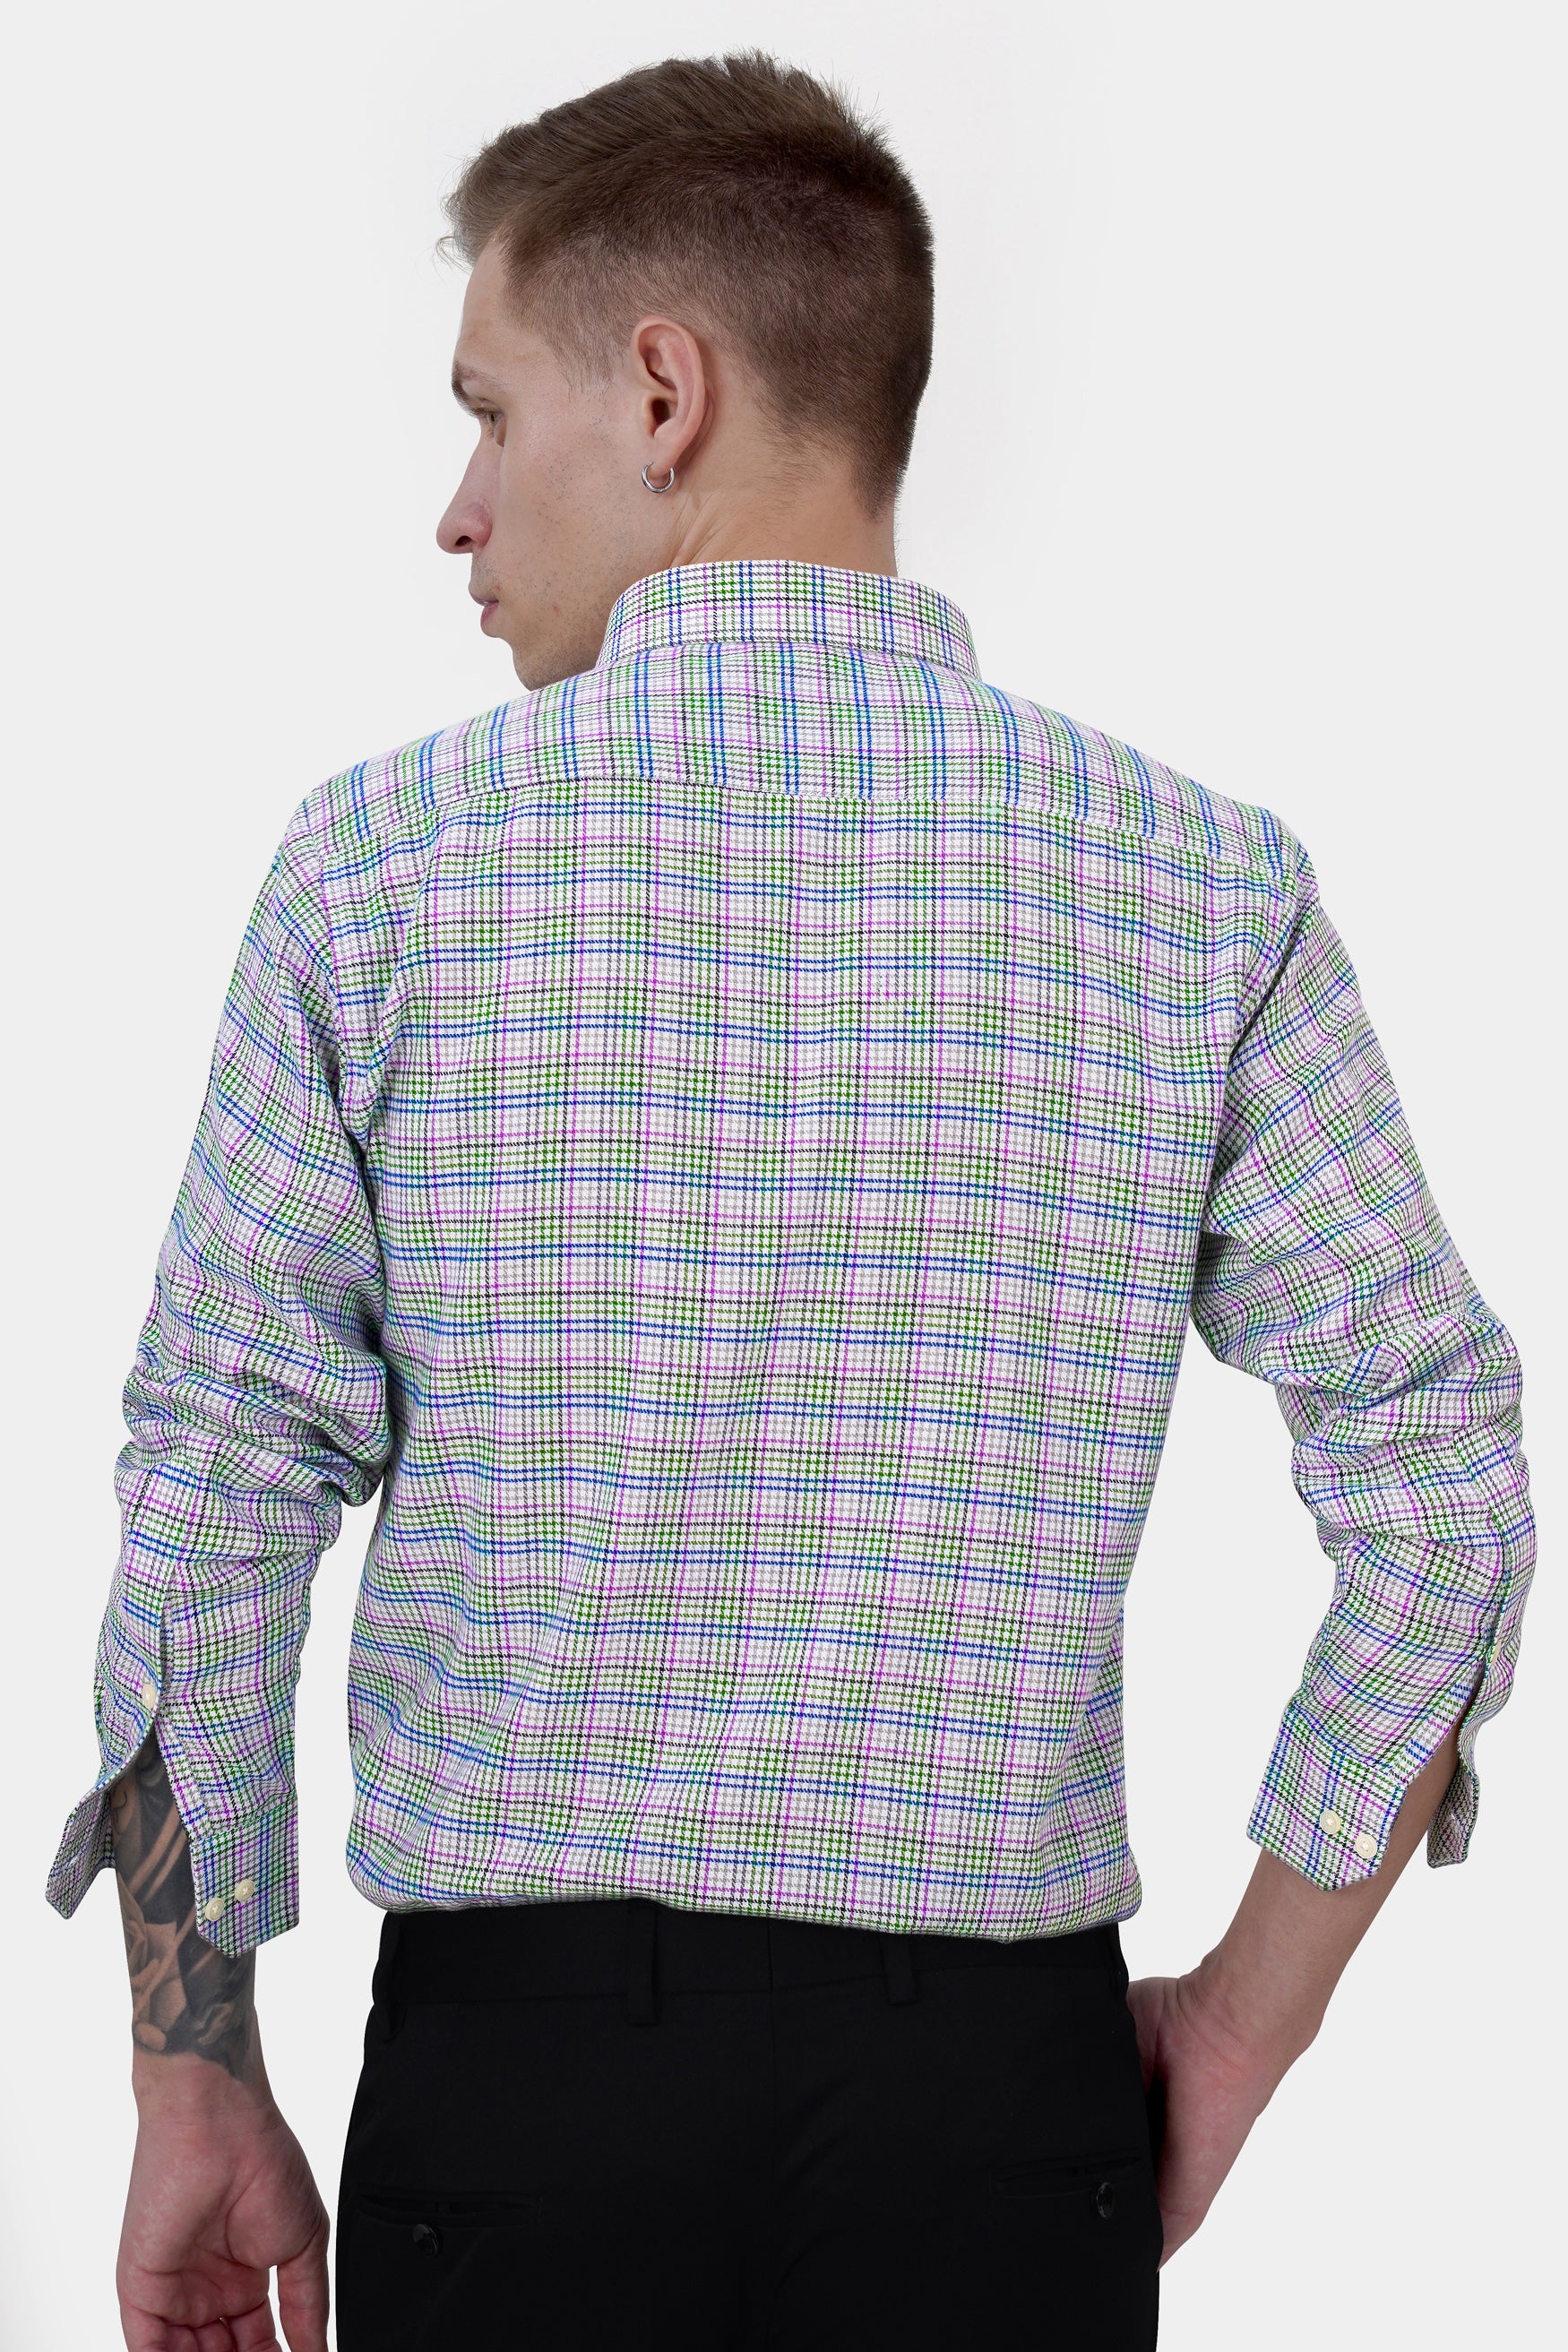 Bright White with Matcha Green and Azure Blue Checkered Houndstooth Shirt 11745-BD-38, 11745-BD-H-38, 11745-BD-39, 11745-BD-H-39, 11745-BD-40, 11745-BD-H-40, 11745-BD-42, 11745-BD-H-42, 11745-BD-44, 11745-BD-H-44, 11745-BD-46, 11745-BD-H-46, 11745-BD-48, 11745-BD-H-48, 11745-BD-50, 11745-BD-H-50, 11745-BD-52, 11745-BD-H-52